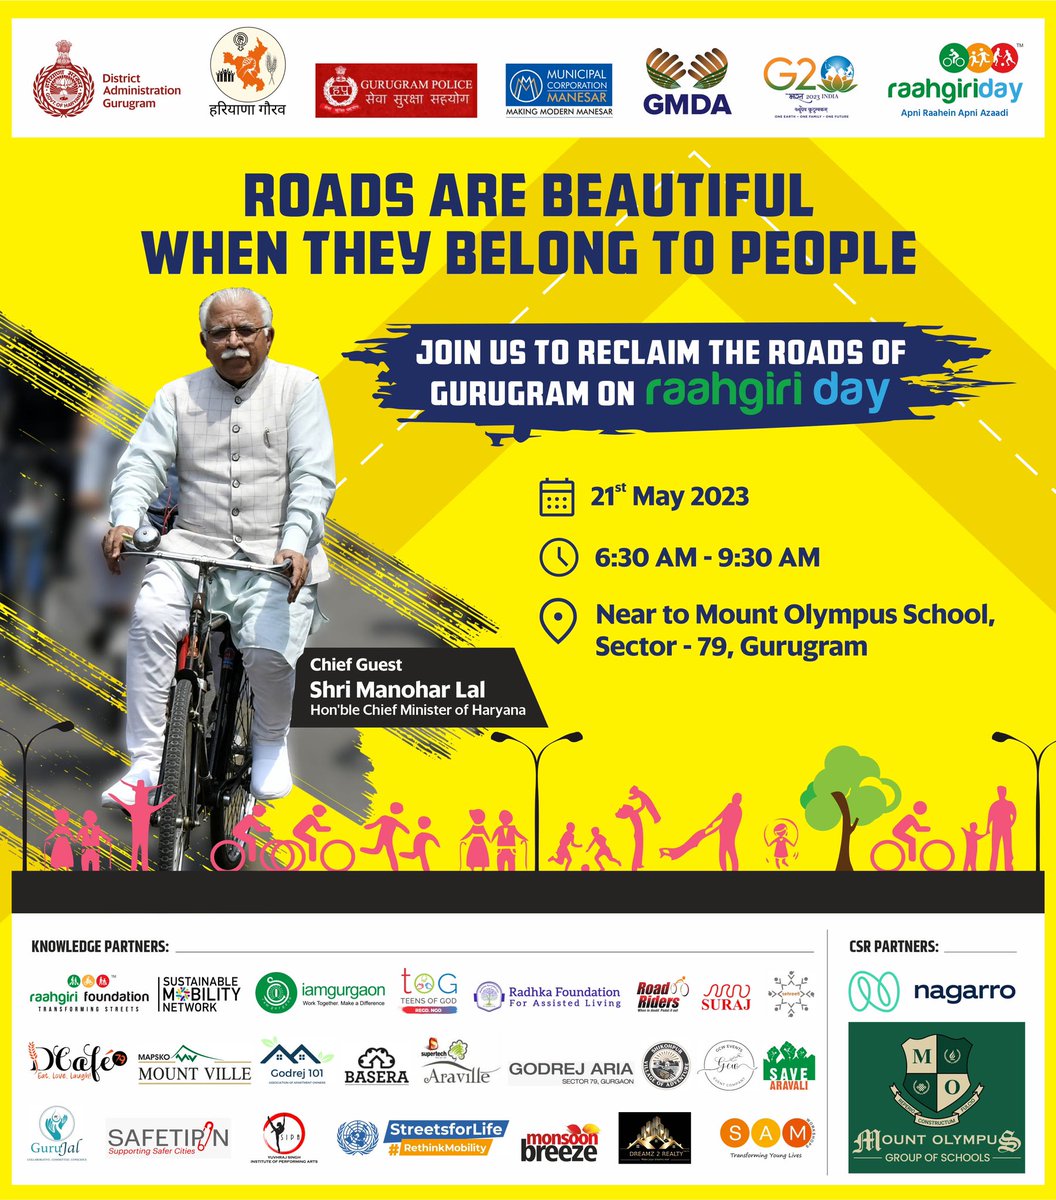 Just 3 days to go… ⏱️ Raahgiri Day is back in Gurugram, this Sunday from 6:30 - 9:30 a.m. and we are joined by @mlkhattar as our chief guest for the event! Bring your friends and family, and reclaim your streets! 🚶‍♀️ 🚴‍♀️ 🏃‍♂️ #RethinkMobility @DC_Gurugram @OfficialGMDA